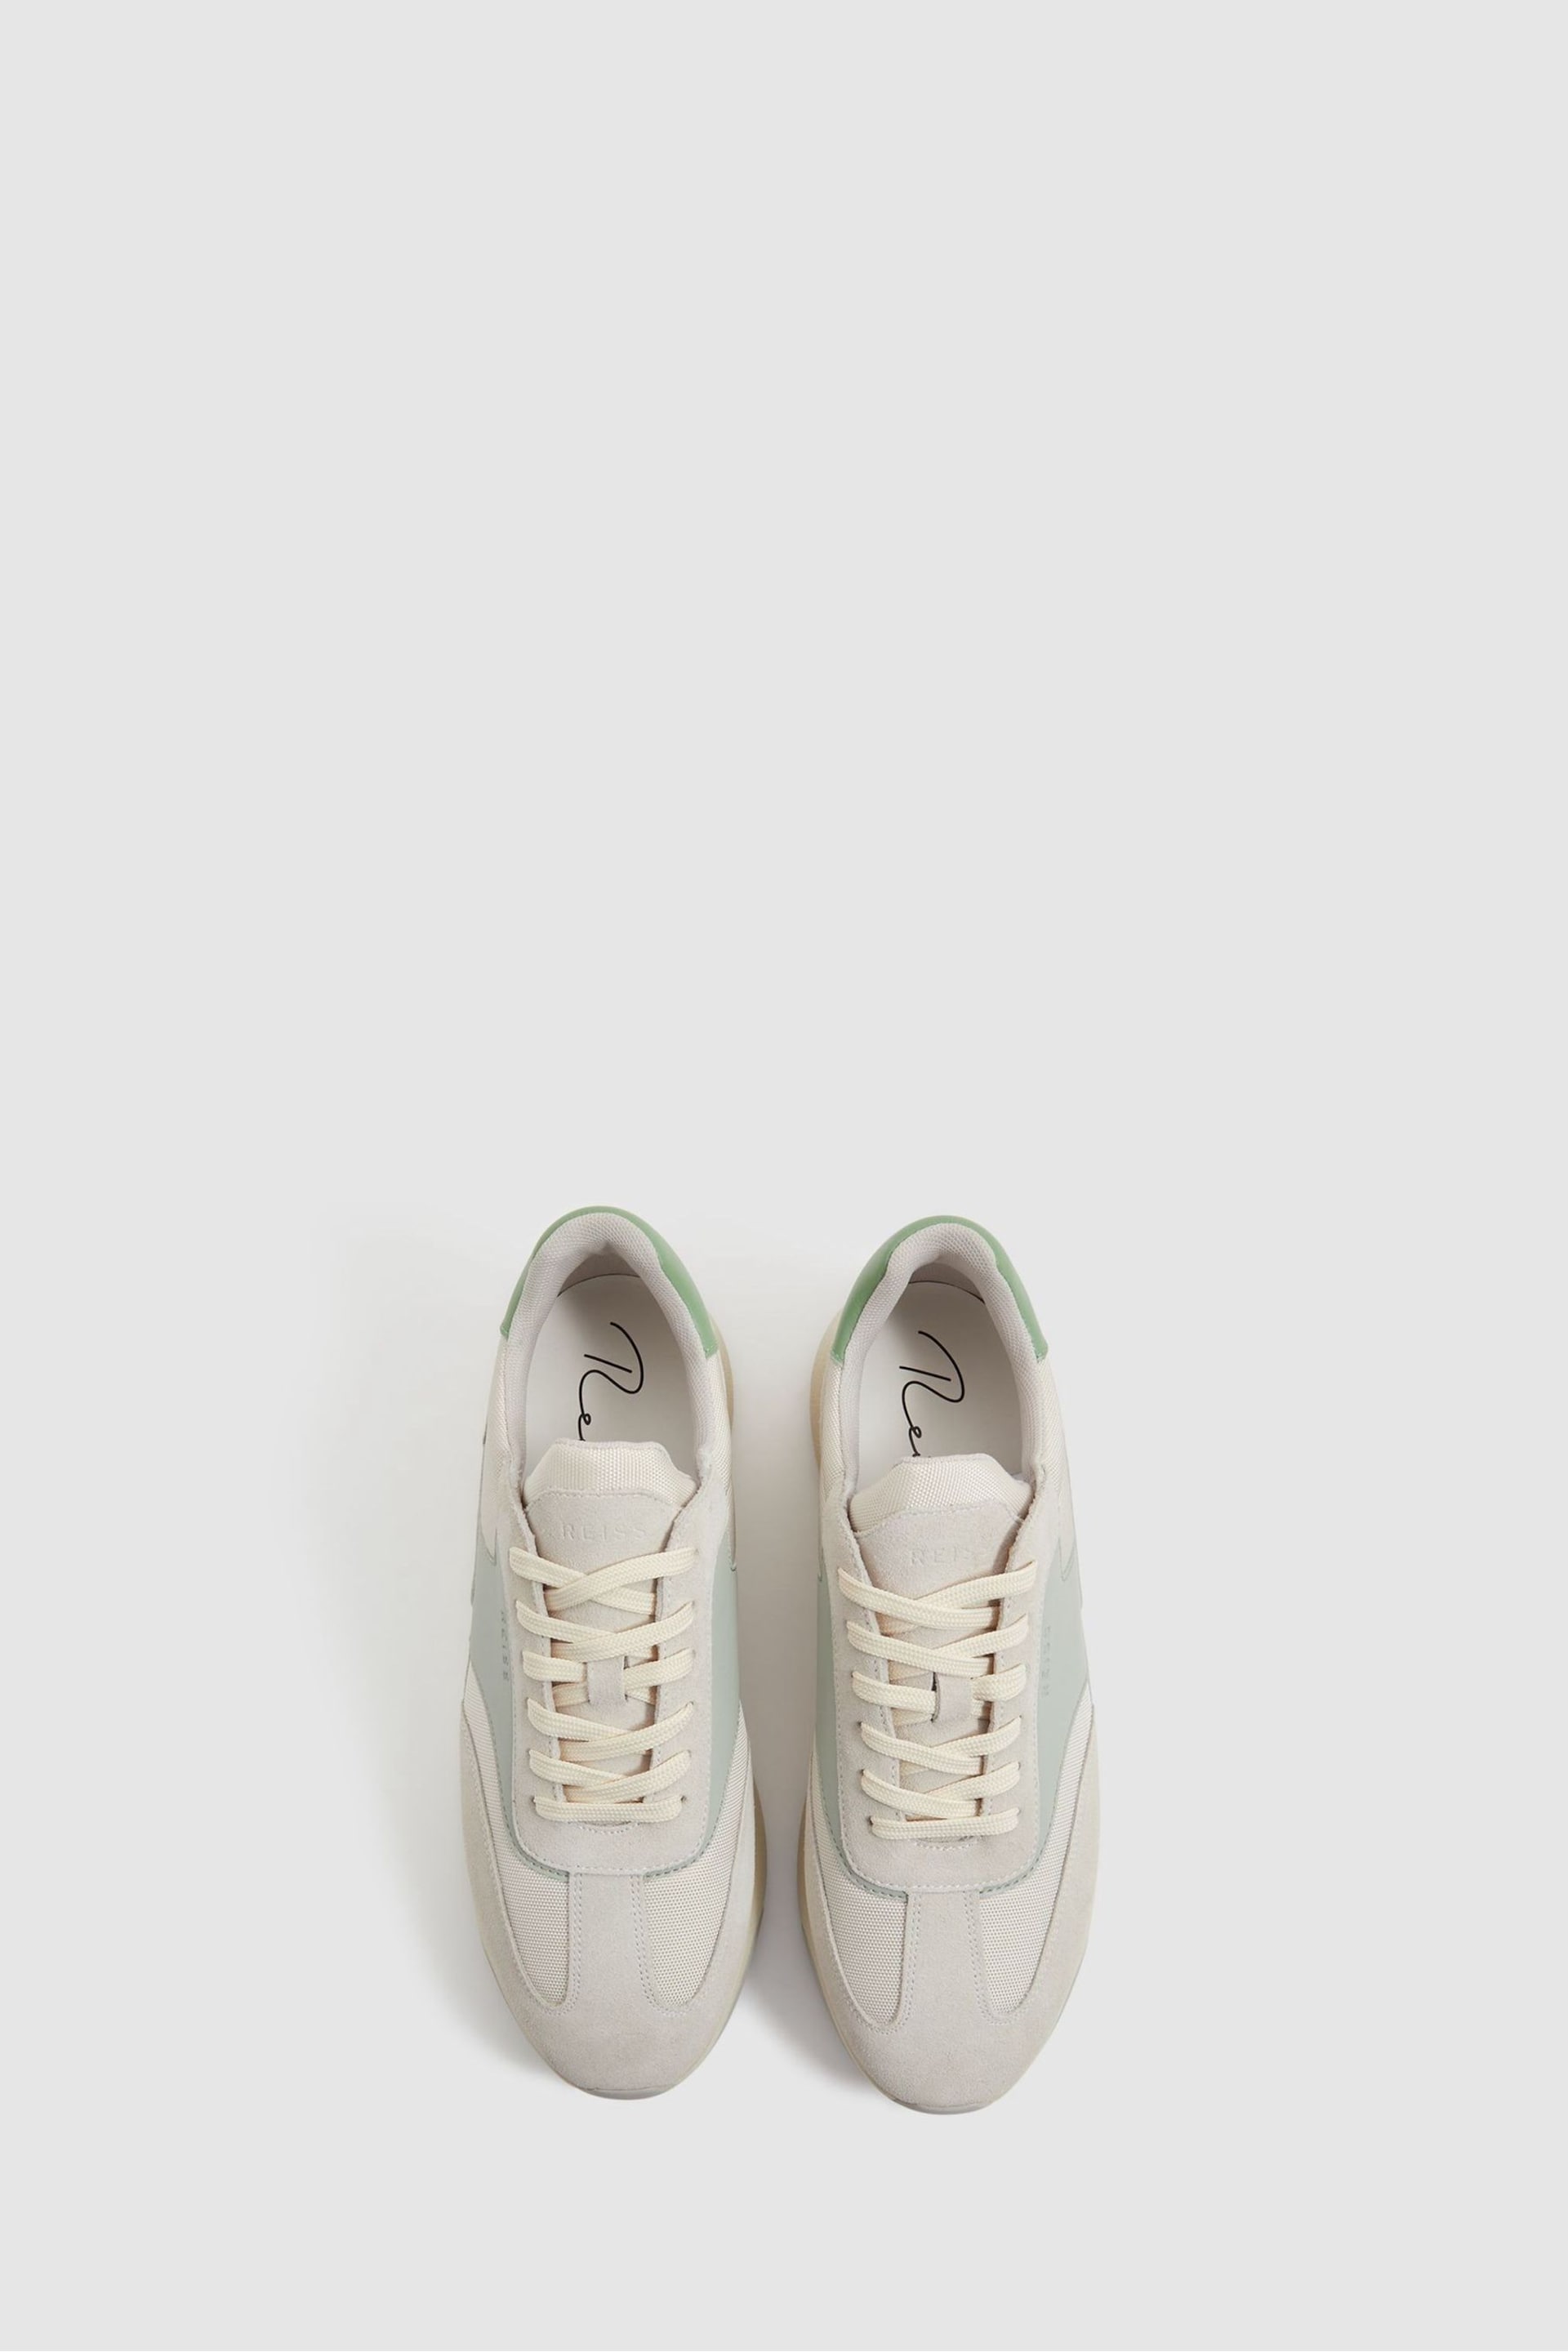 Reiss Pistachio/White Emmett Leather Suede Running Trainers - Image 3 of 4